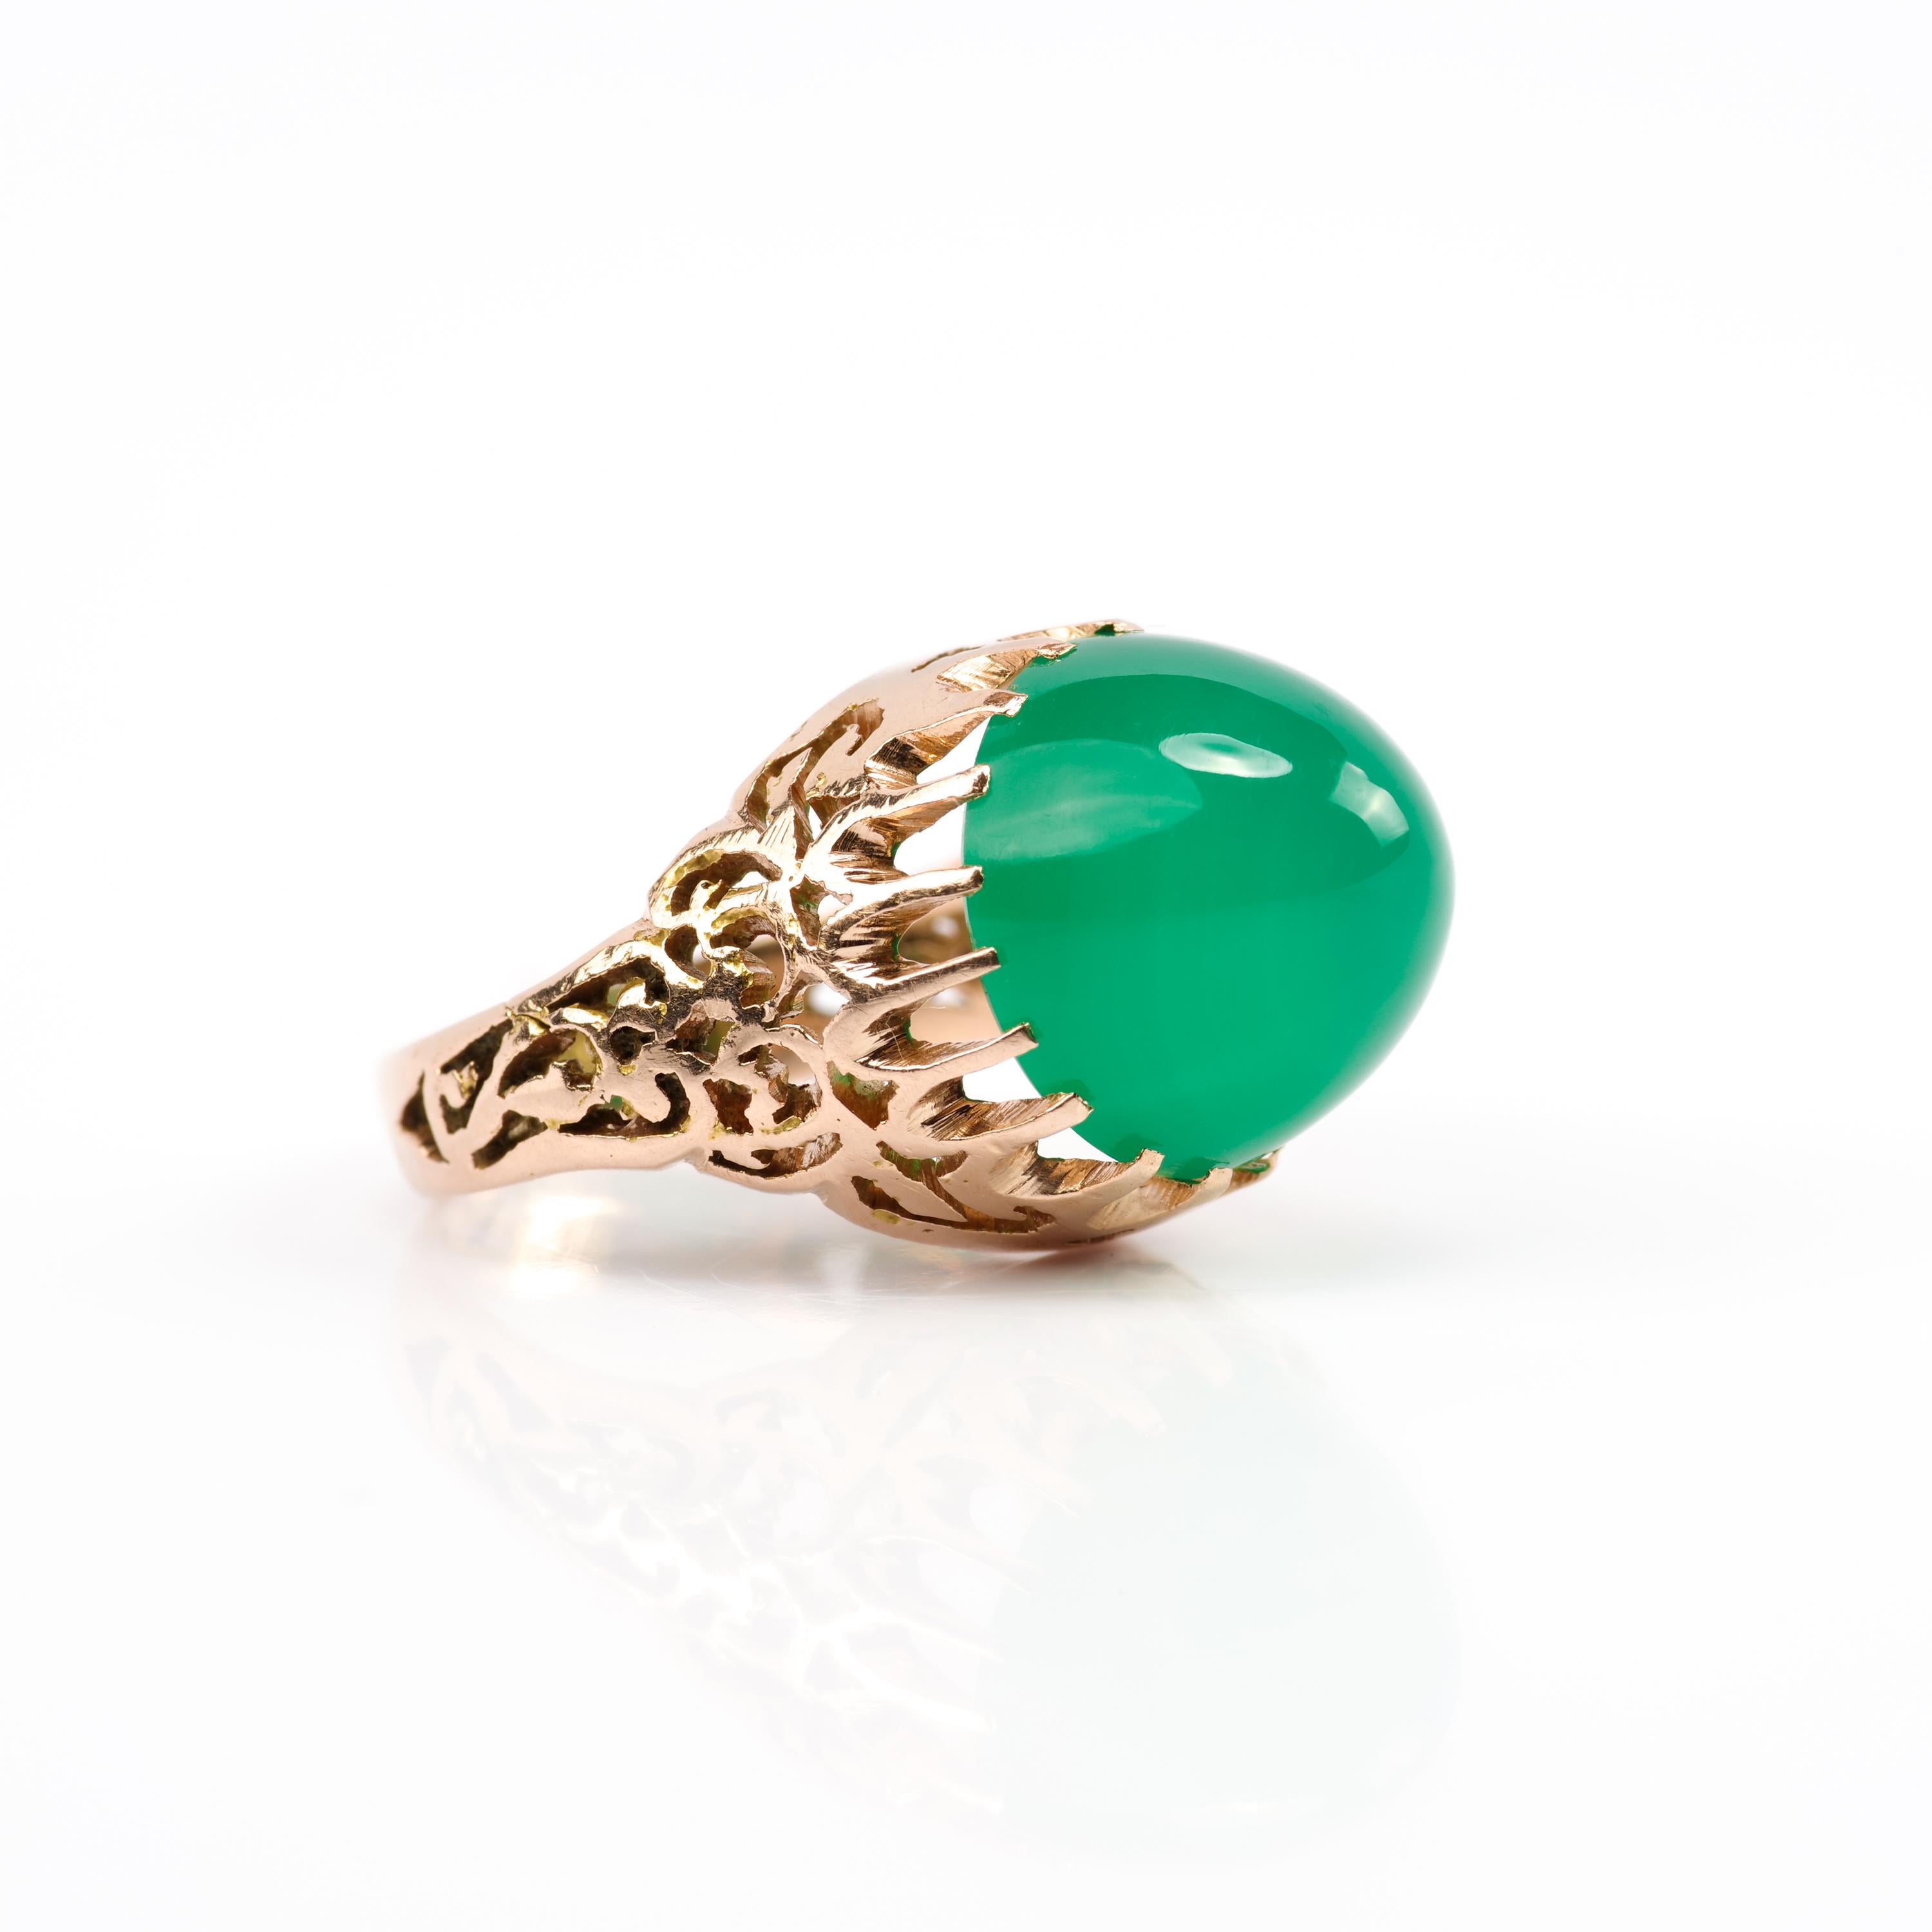 A vivid green translucent sugarloaf chrysoprase gem is held aloft by nineteen dutiful prongs in this dramatic and infinitely cool Art Deco ring from Egypt. Entirely hand-crafted in 14K rose gold —the perfect compliment to the flawlessly polished and